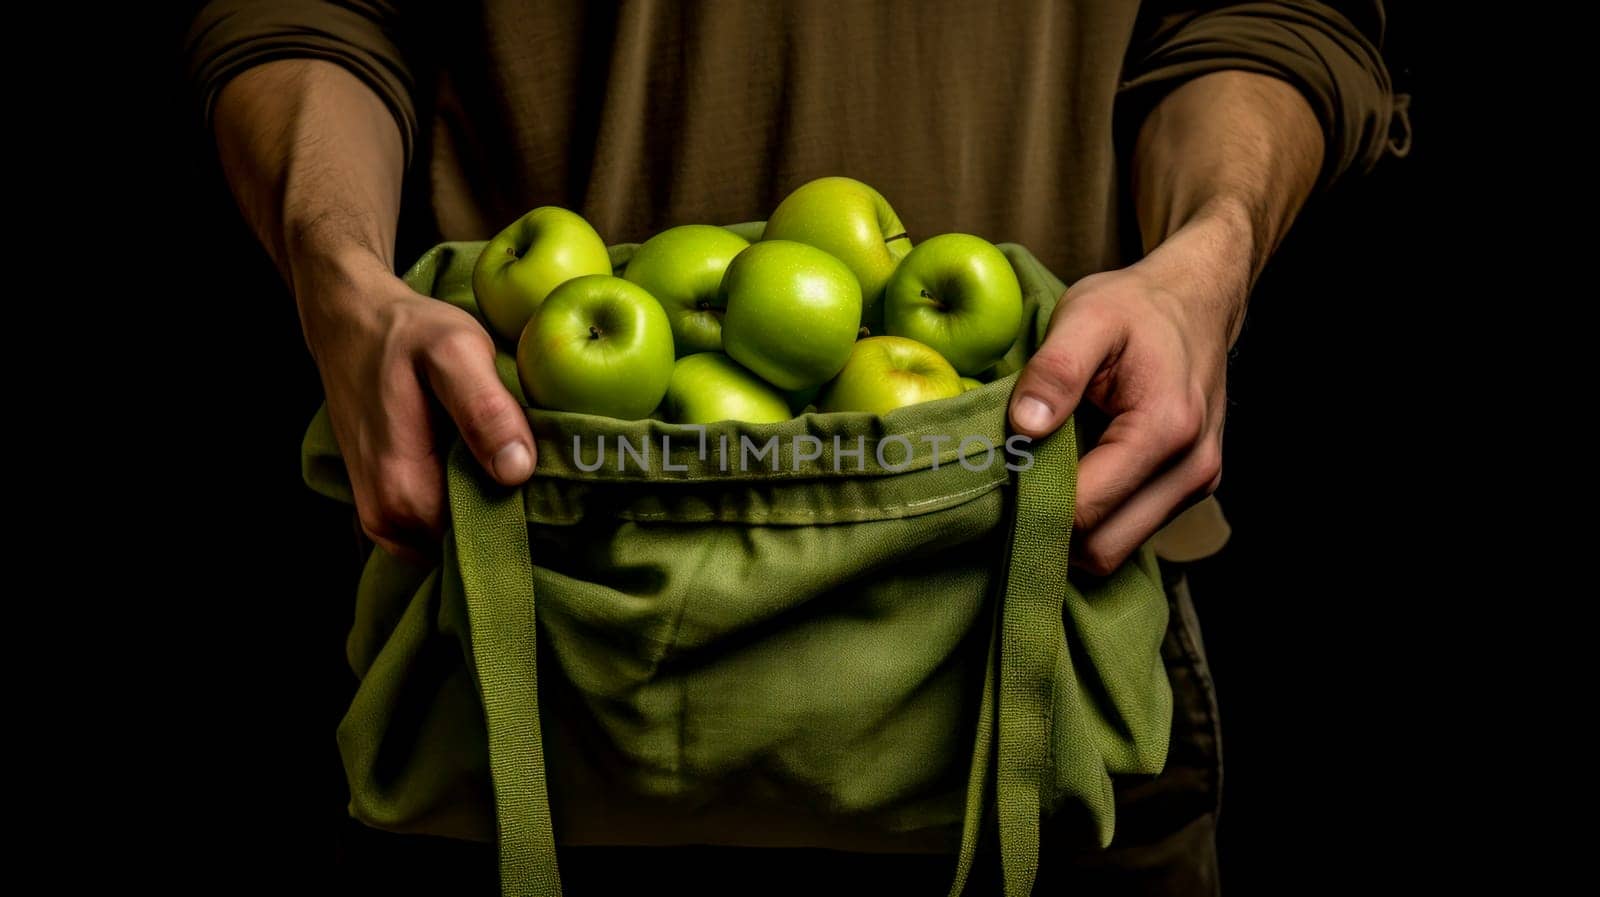 A man holds in his hands a large number of green apples in a bag made of natural fabric. The concept of recycling, saving, fighting plastic, proper nutrition, healthy lifestyle, diet, veganism, vegetarianism, gardening and farming, fresh fruit